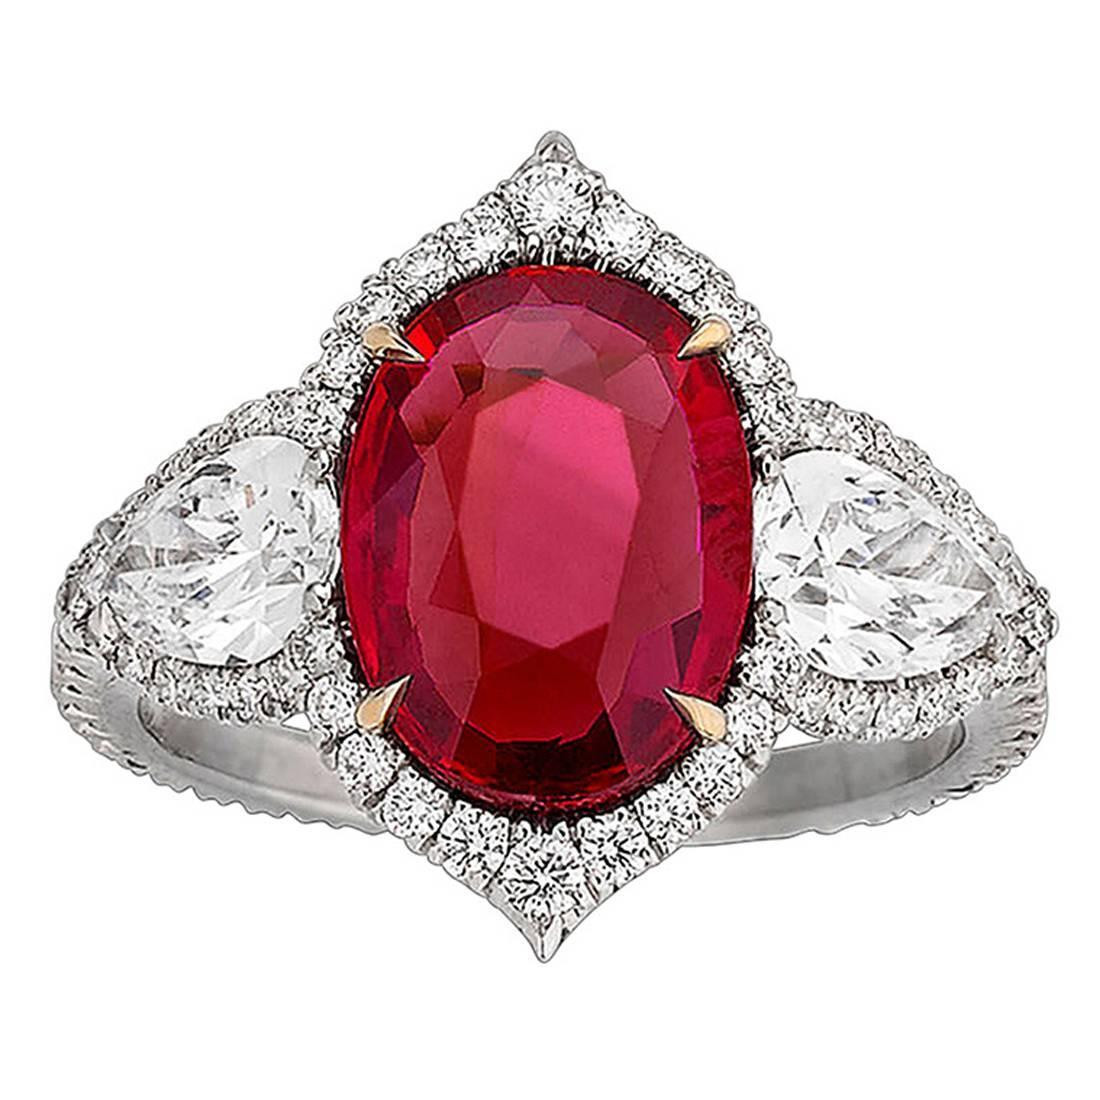 Ruby Diamond Rings
 Untreated Ruby and Diamond Ring 3 02 Carats For Sale at